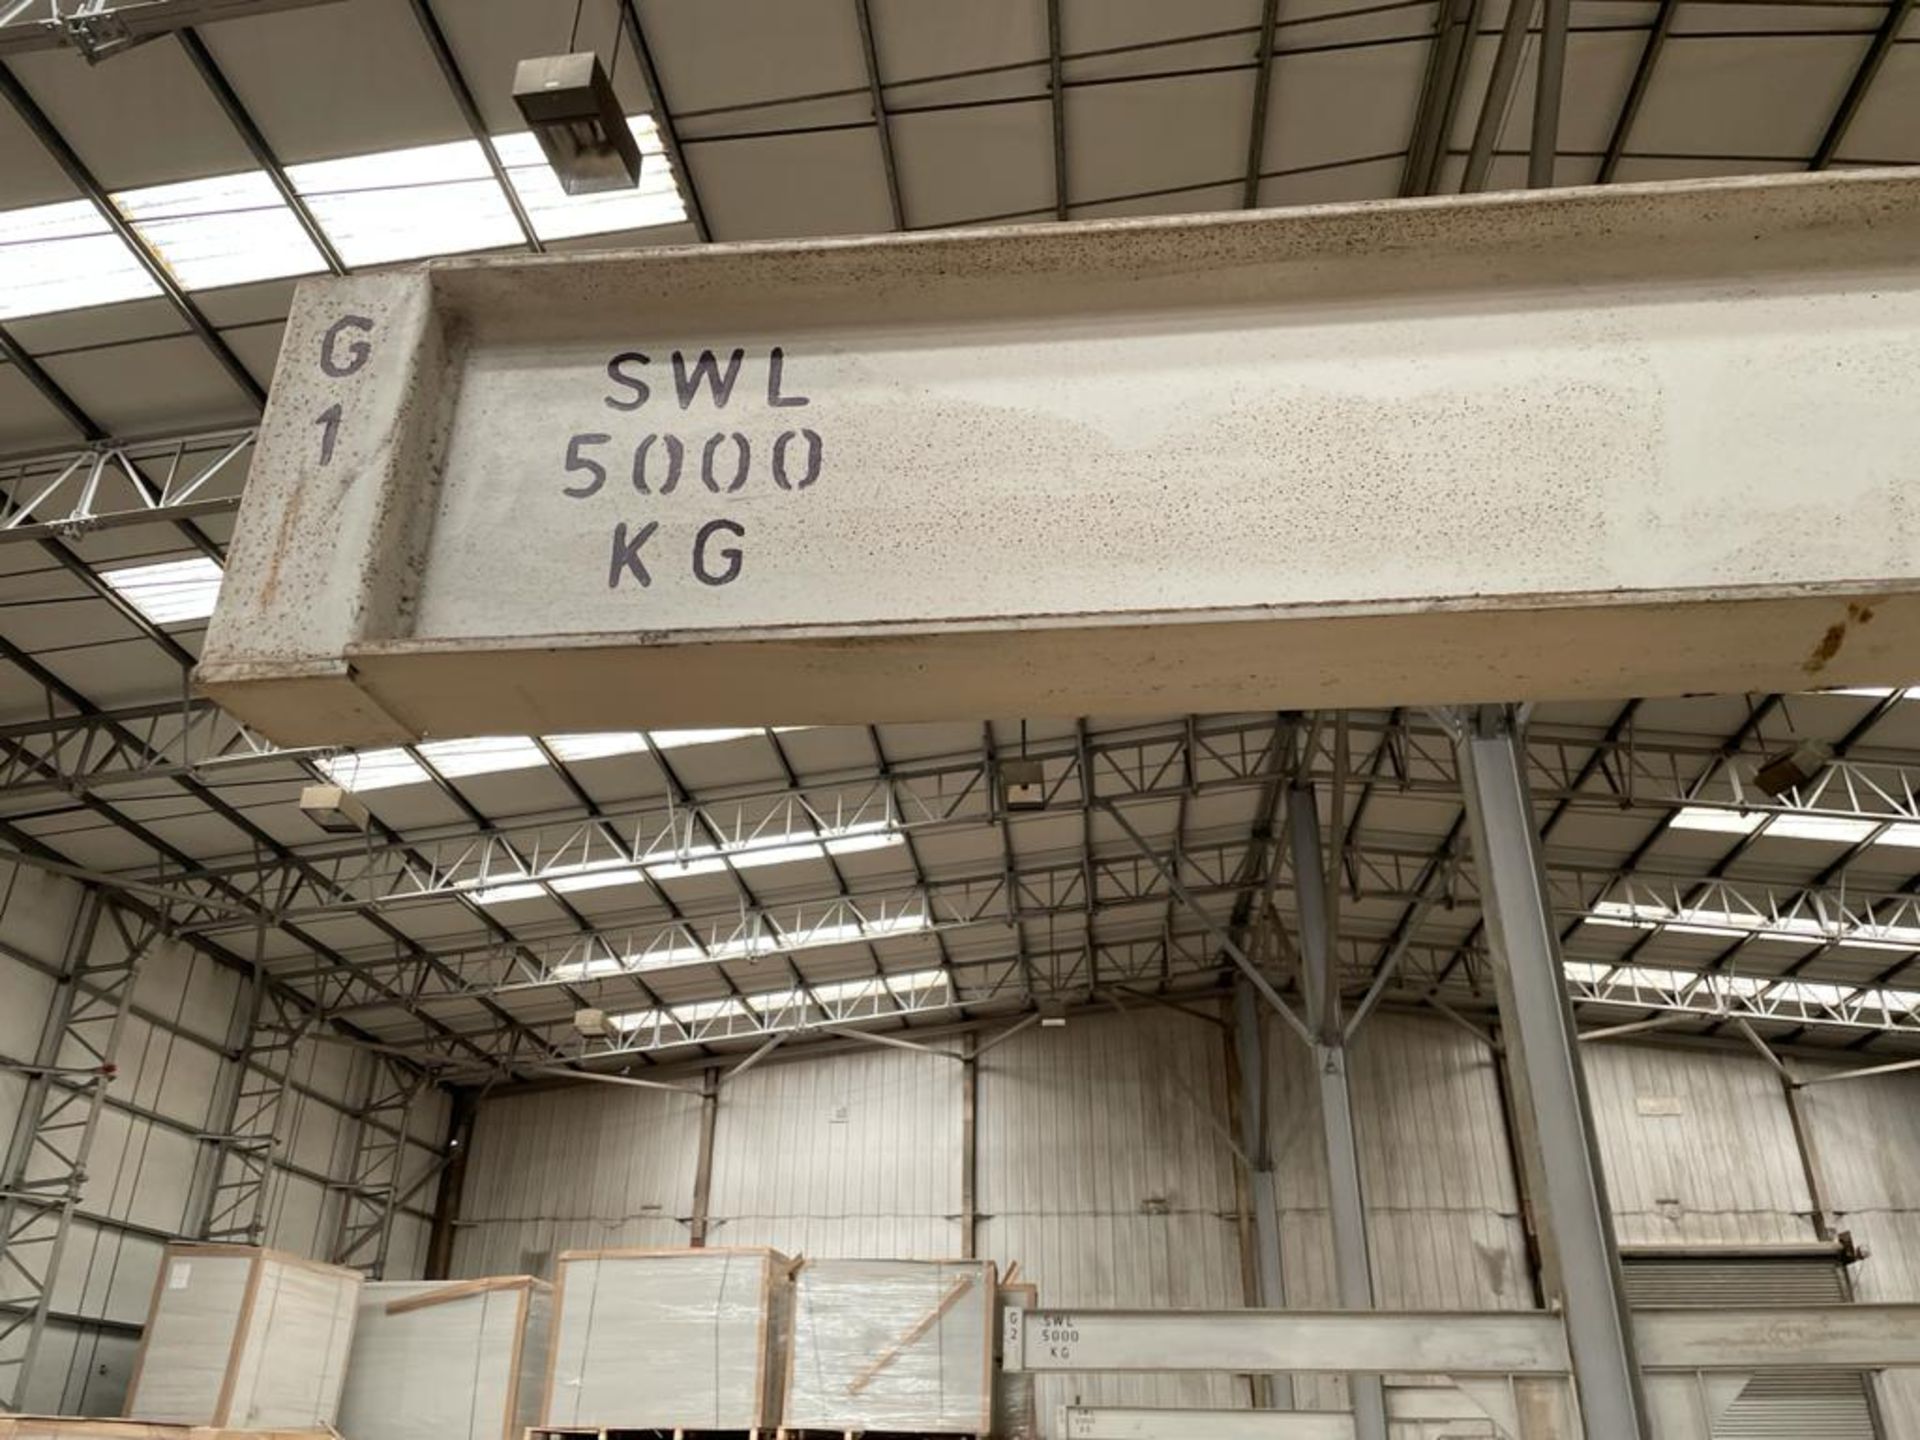 2 x Heavy Duty Cantilever Racking Uprights - SWL 5000kg - Ideal For Builders Merchants or Warehouses - Image 8 of 8